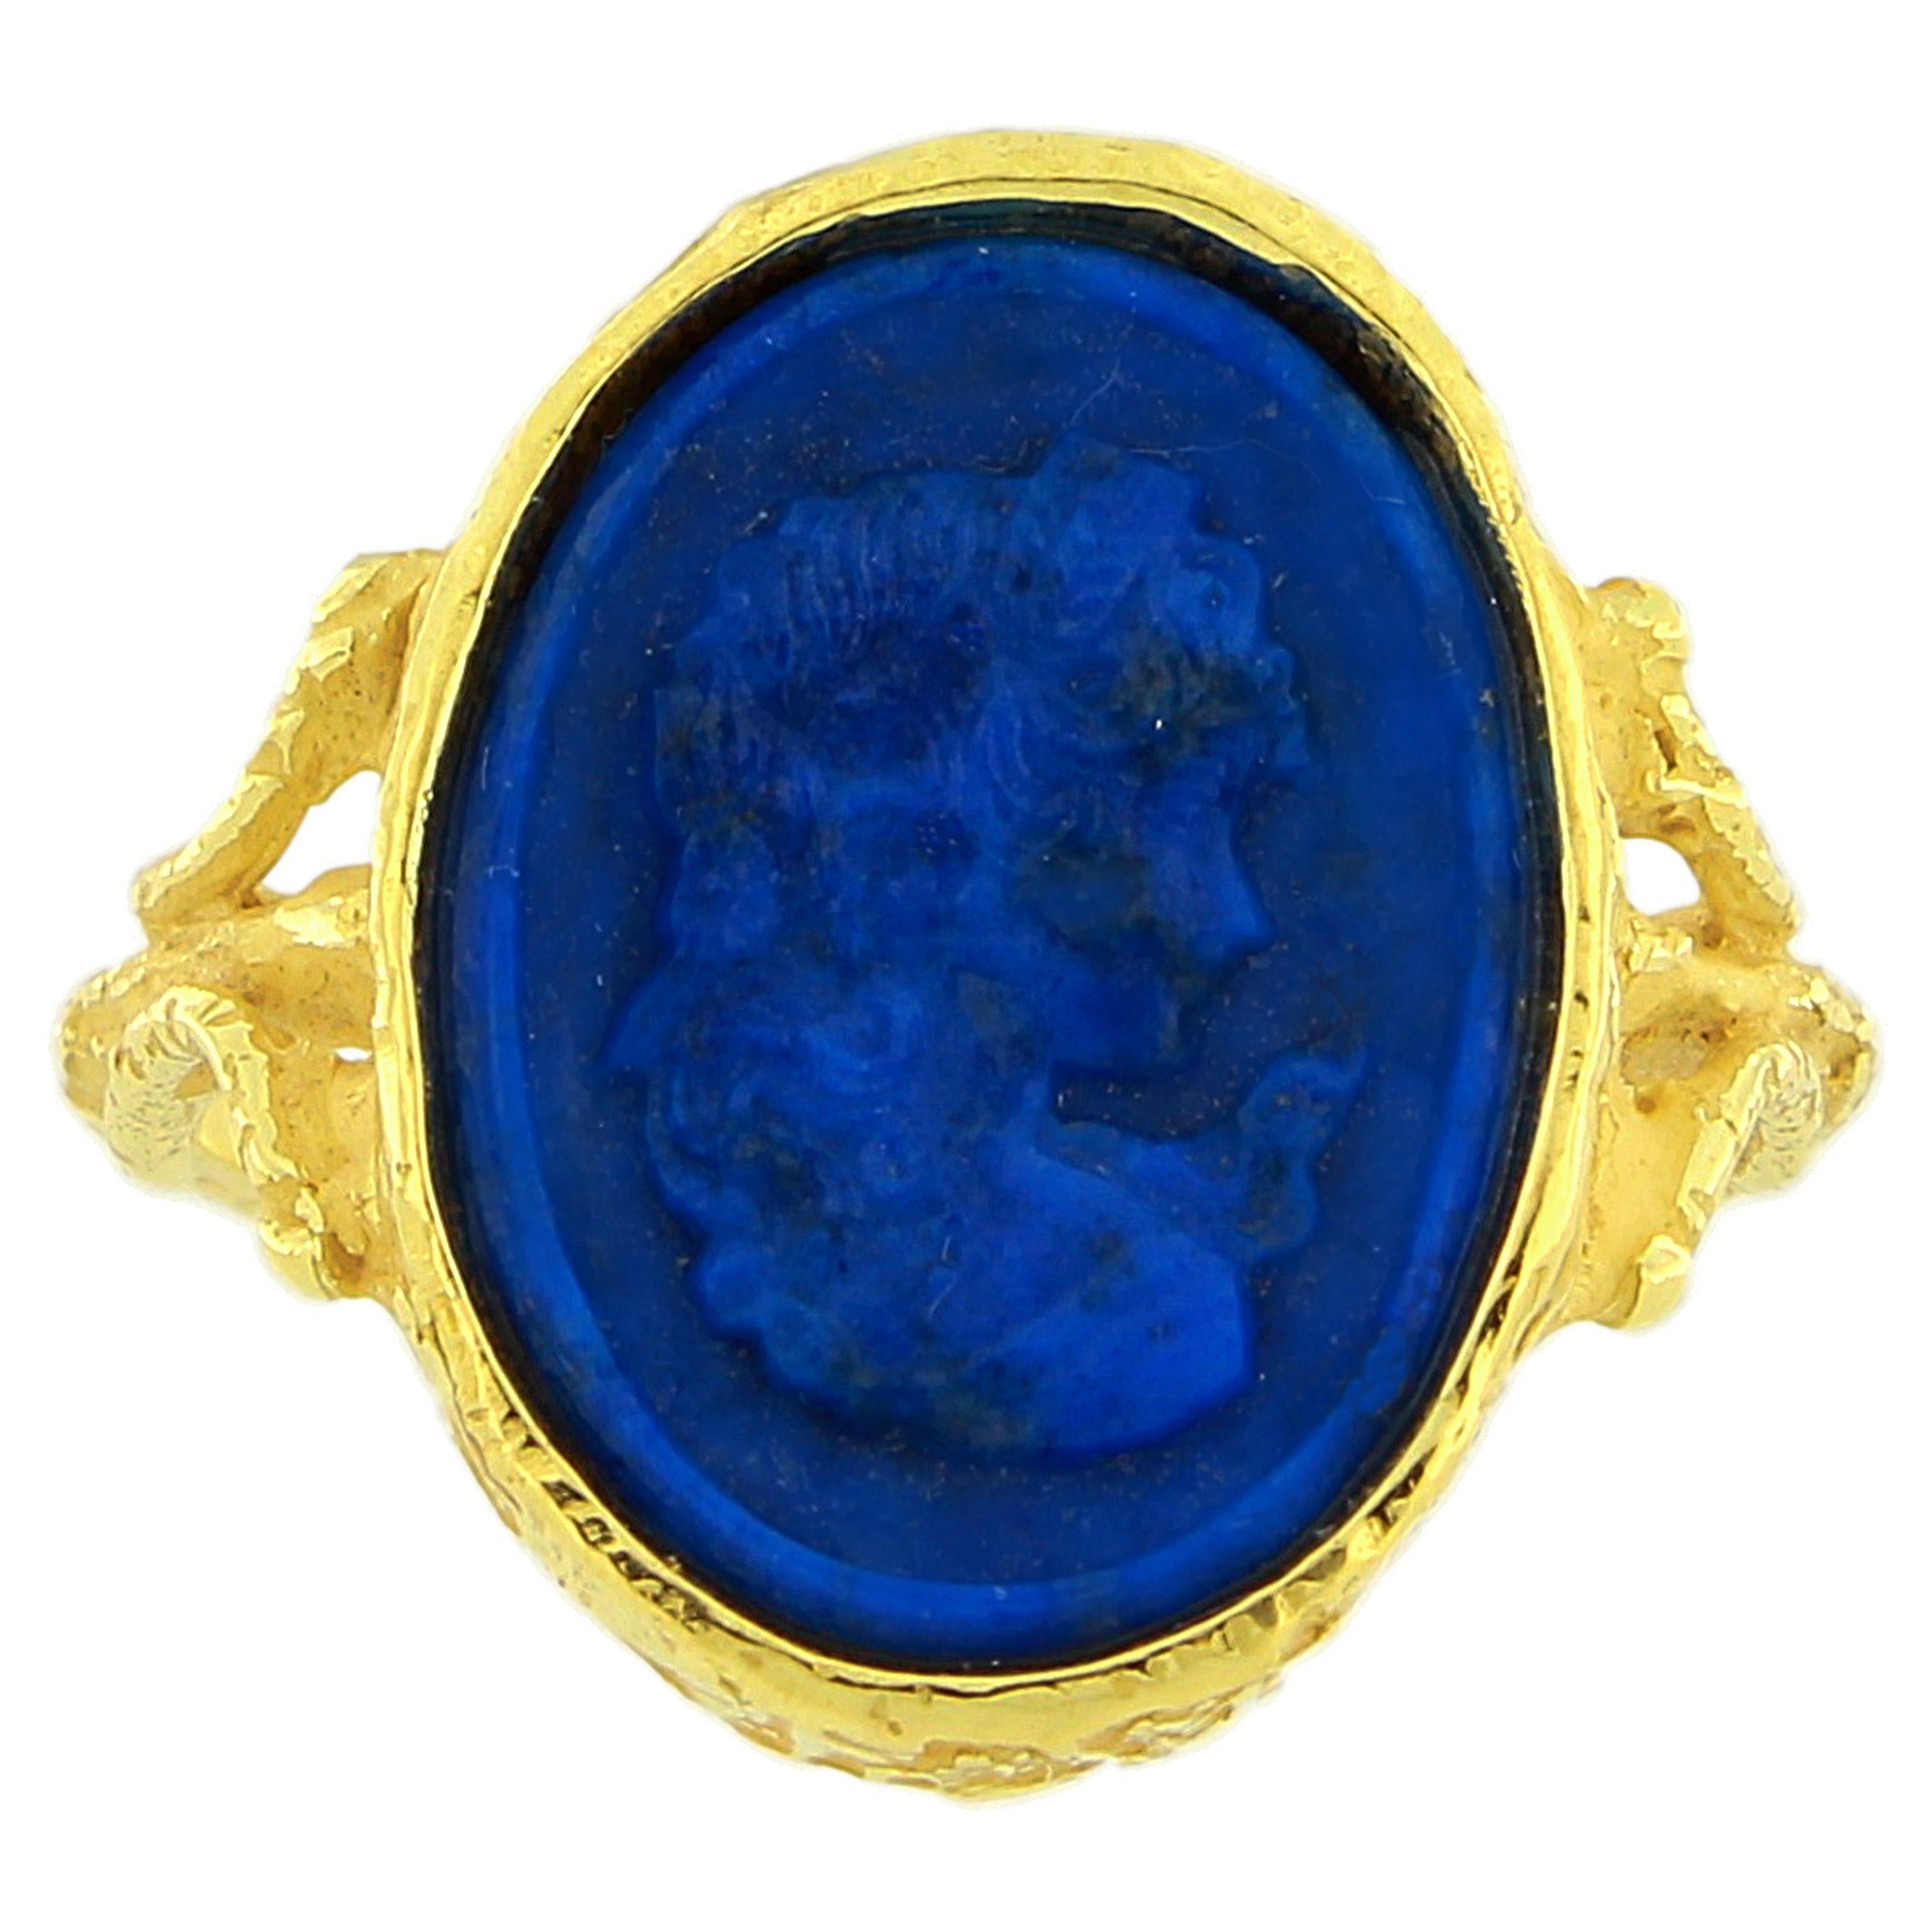 Lapis Lazuli Cameo Ring in Satin Yellow Gold, from Sacchi’s 